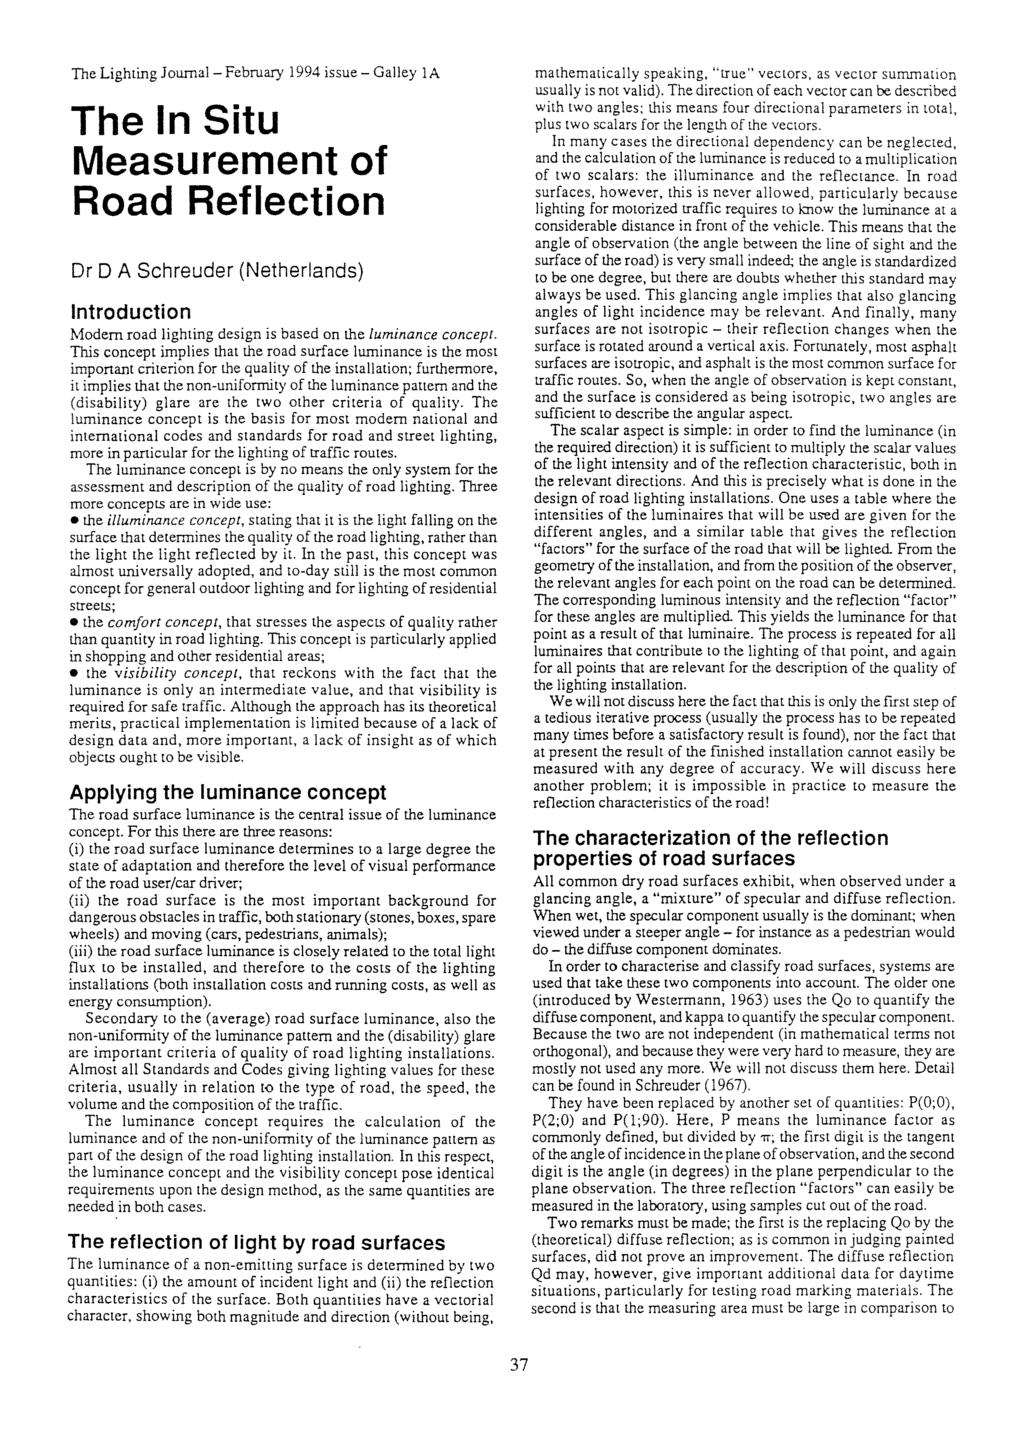 The Lighting Journal- February 1994 issue - Galley IA The In Situ Measurement of Road Reflection Dr D A Schreuder (Netherlands) Introduction Modem road lighting design is based on the luminance